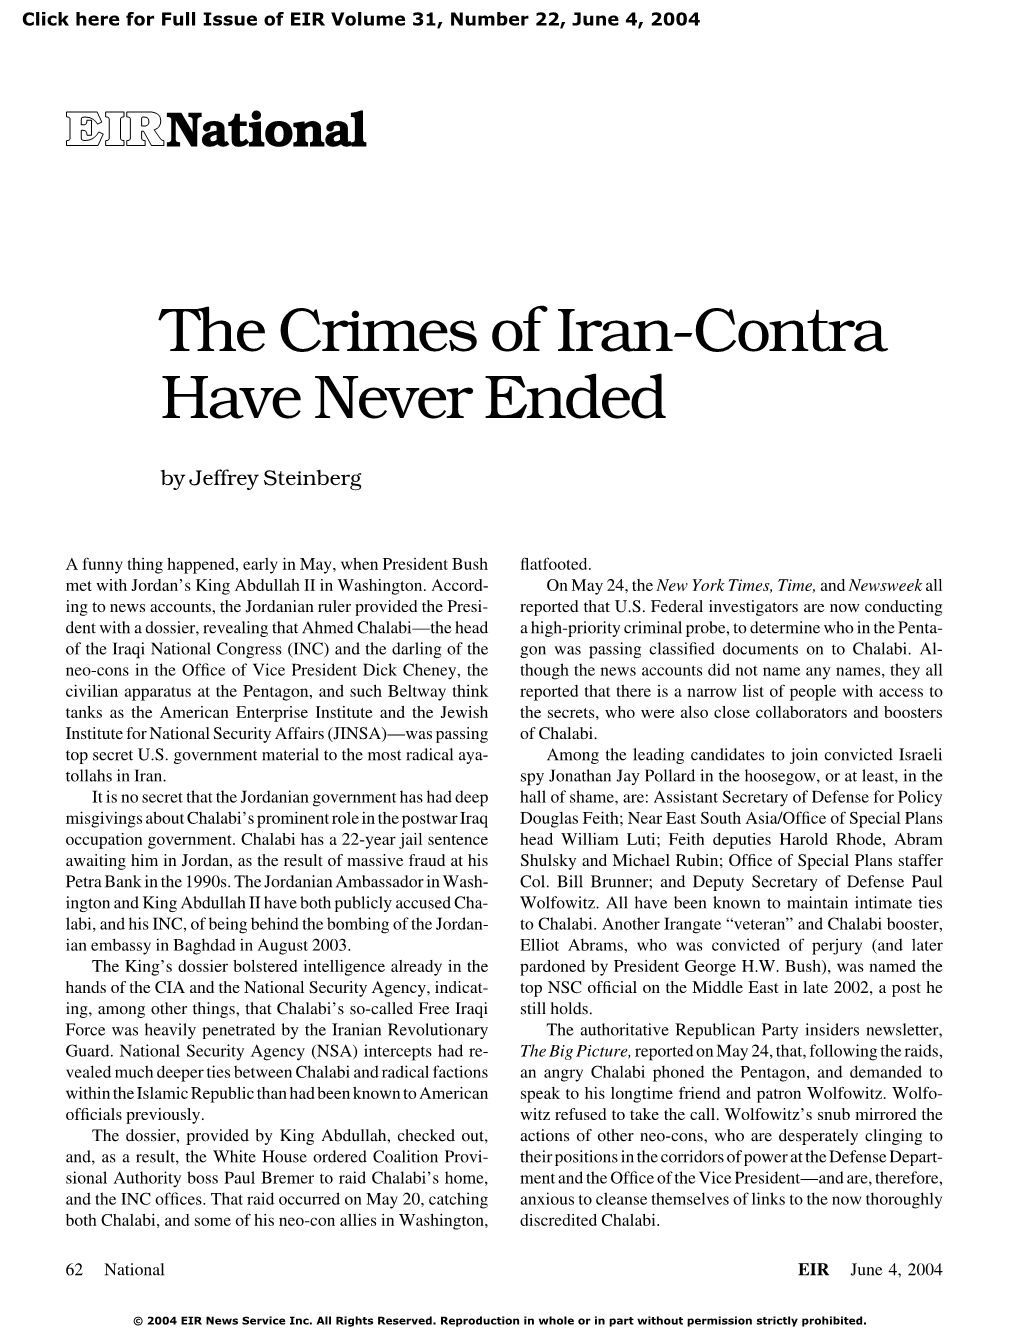 The Crimes of Iran-Contra Have Never Ended